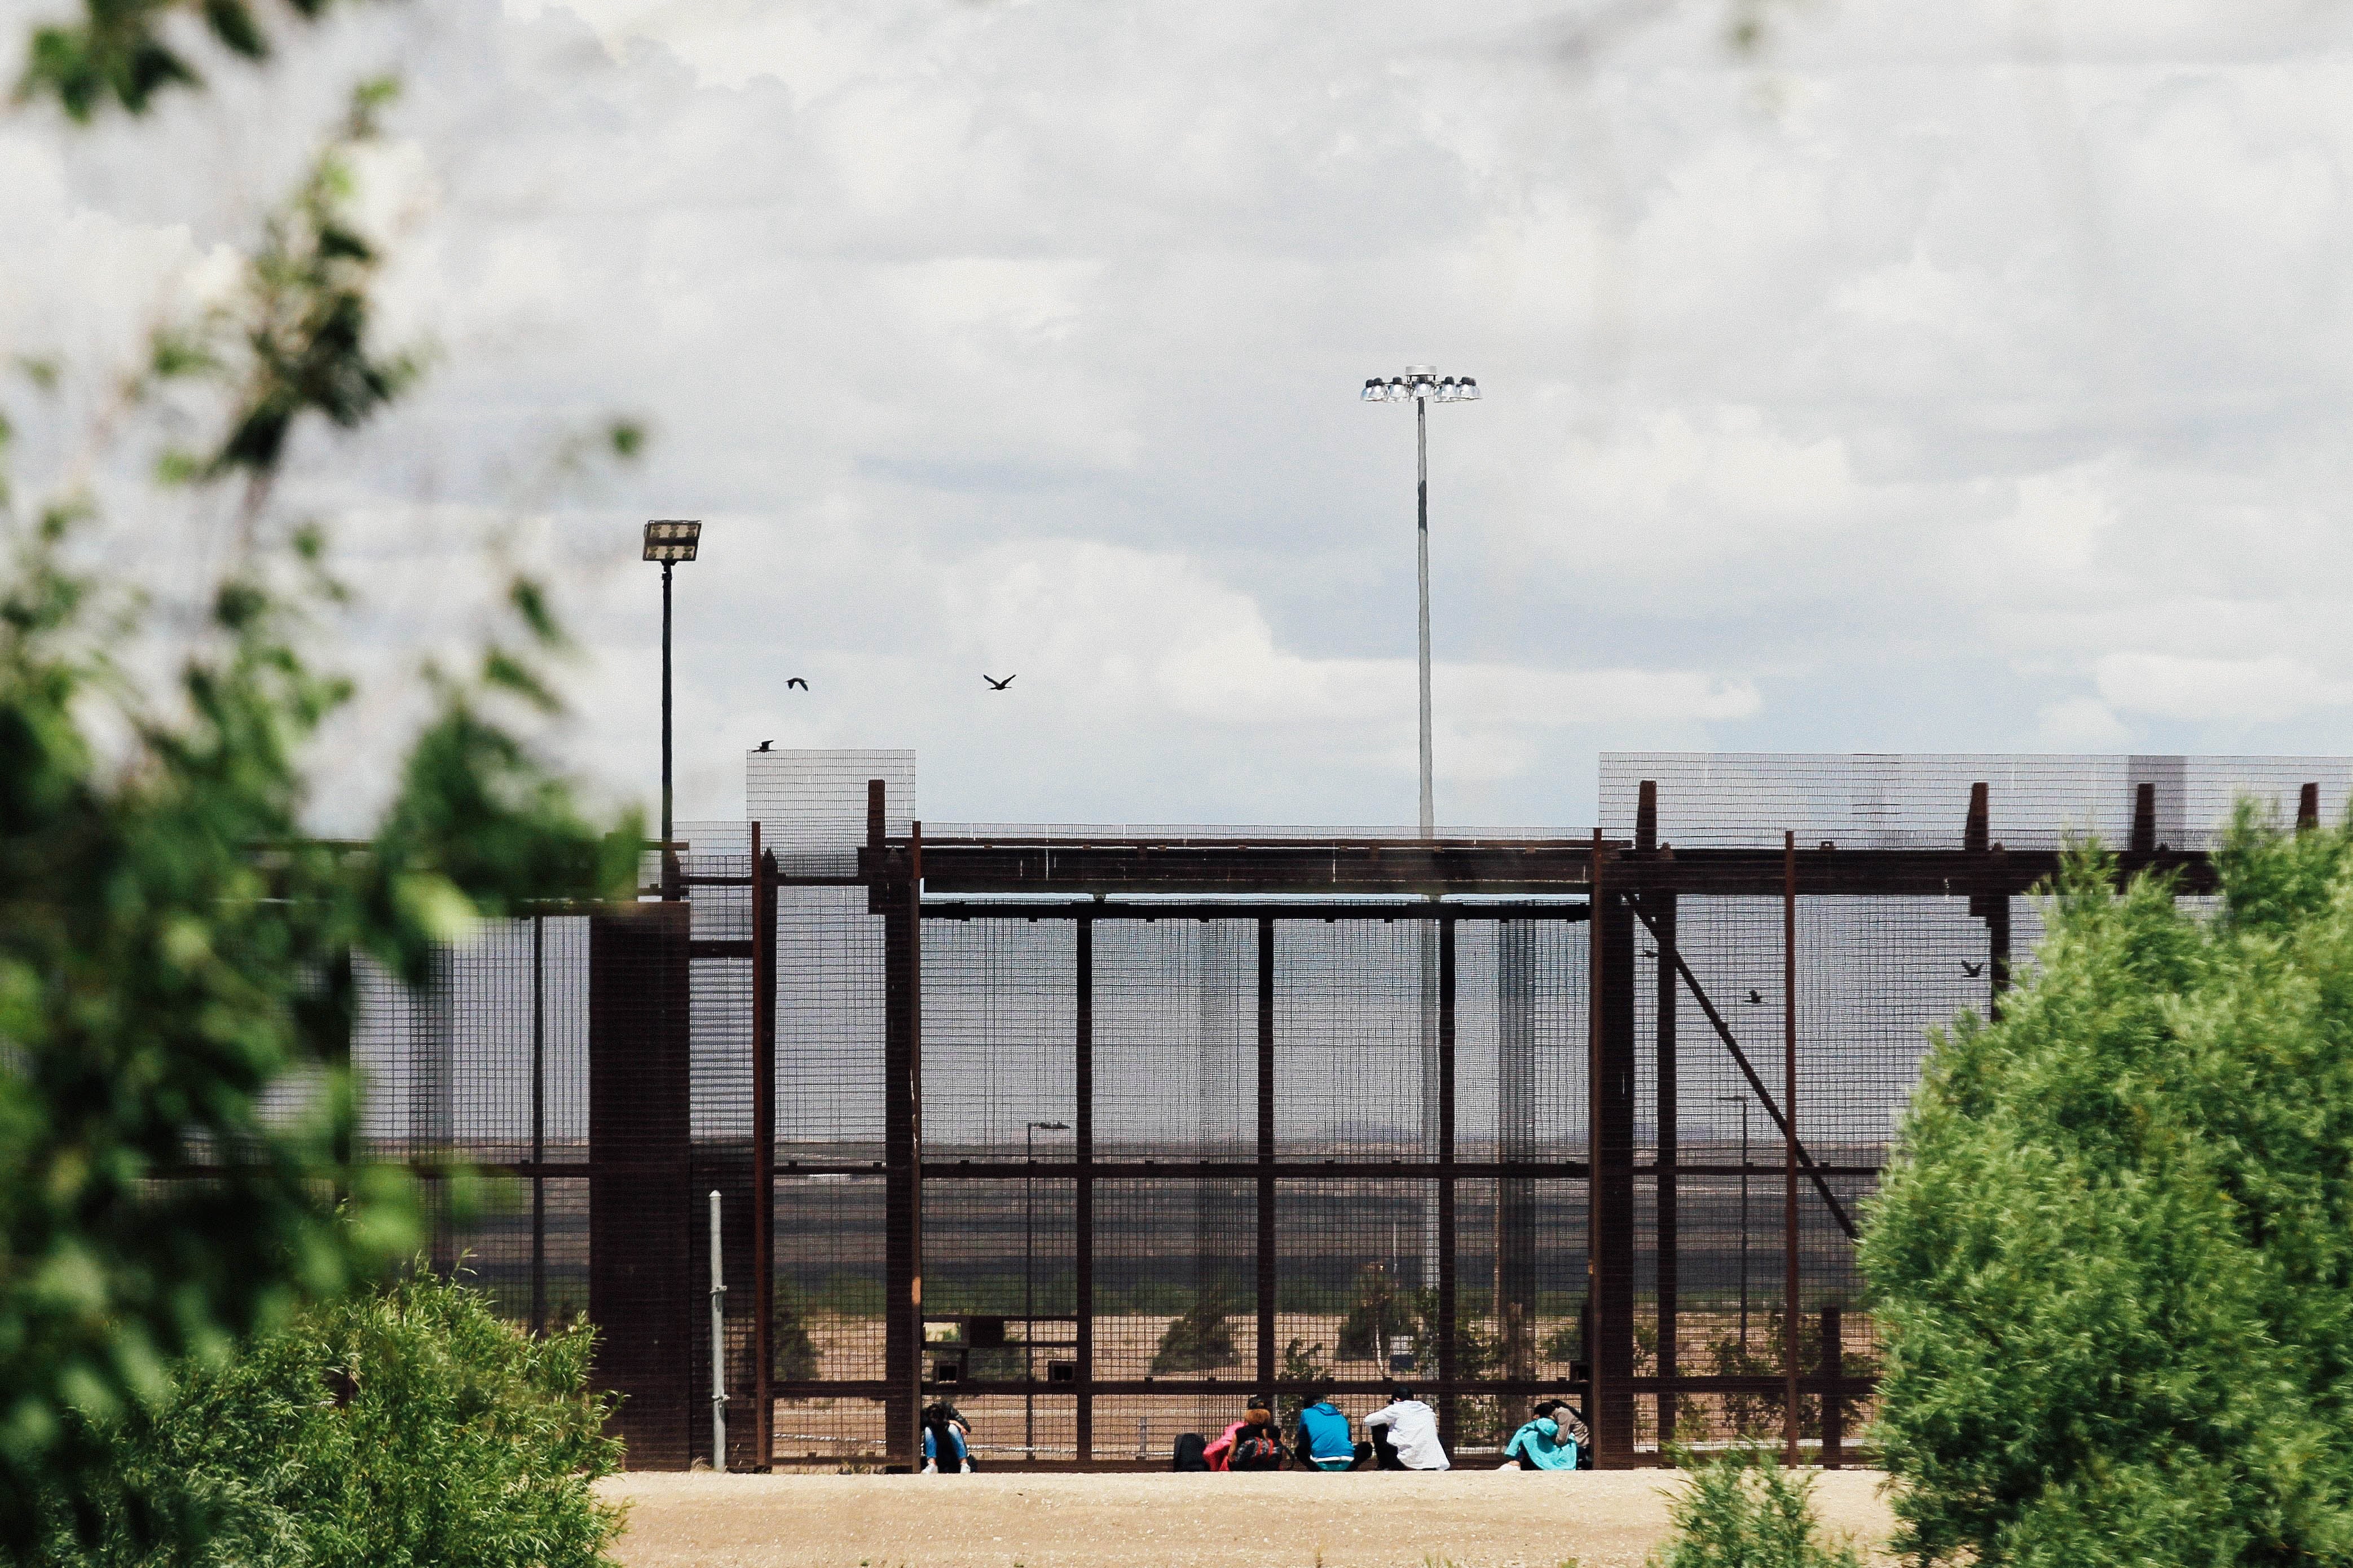 A group of migrants wait to be stopped by the Border Patrol at the border wall in El Paso, Texas as seen from Ciudad Juarez, Mexico on Wednesday.